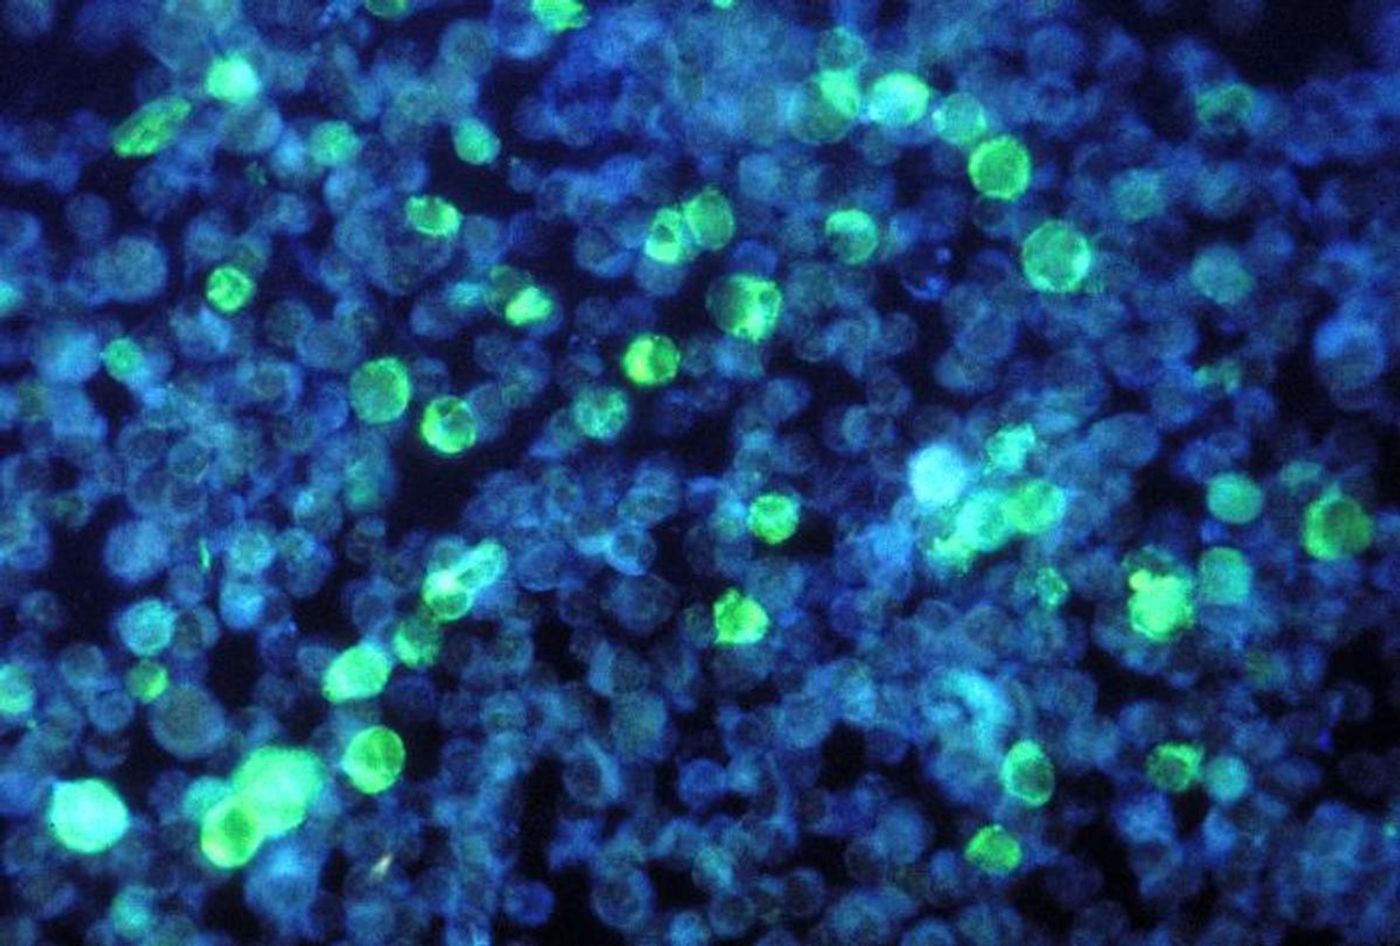 Leukemia cells that contain Epstein-Barr virus (EBV); infected cells are green. EBV, one of the most common human viruses, is a member of the Herpesvirus family. / Credit: CDC/ Dr. Paul M. Feorino